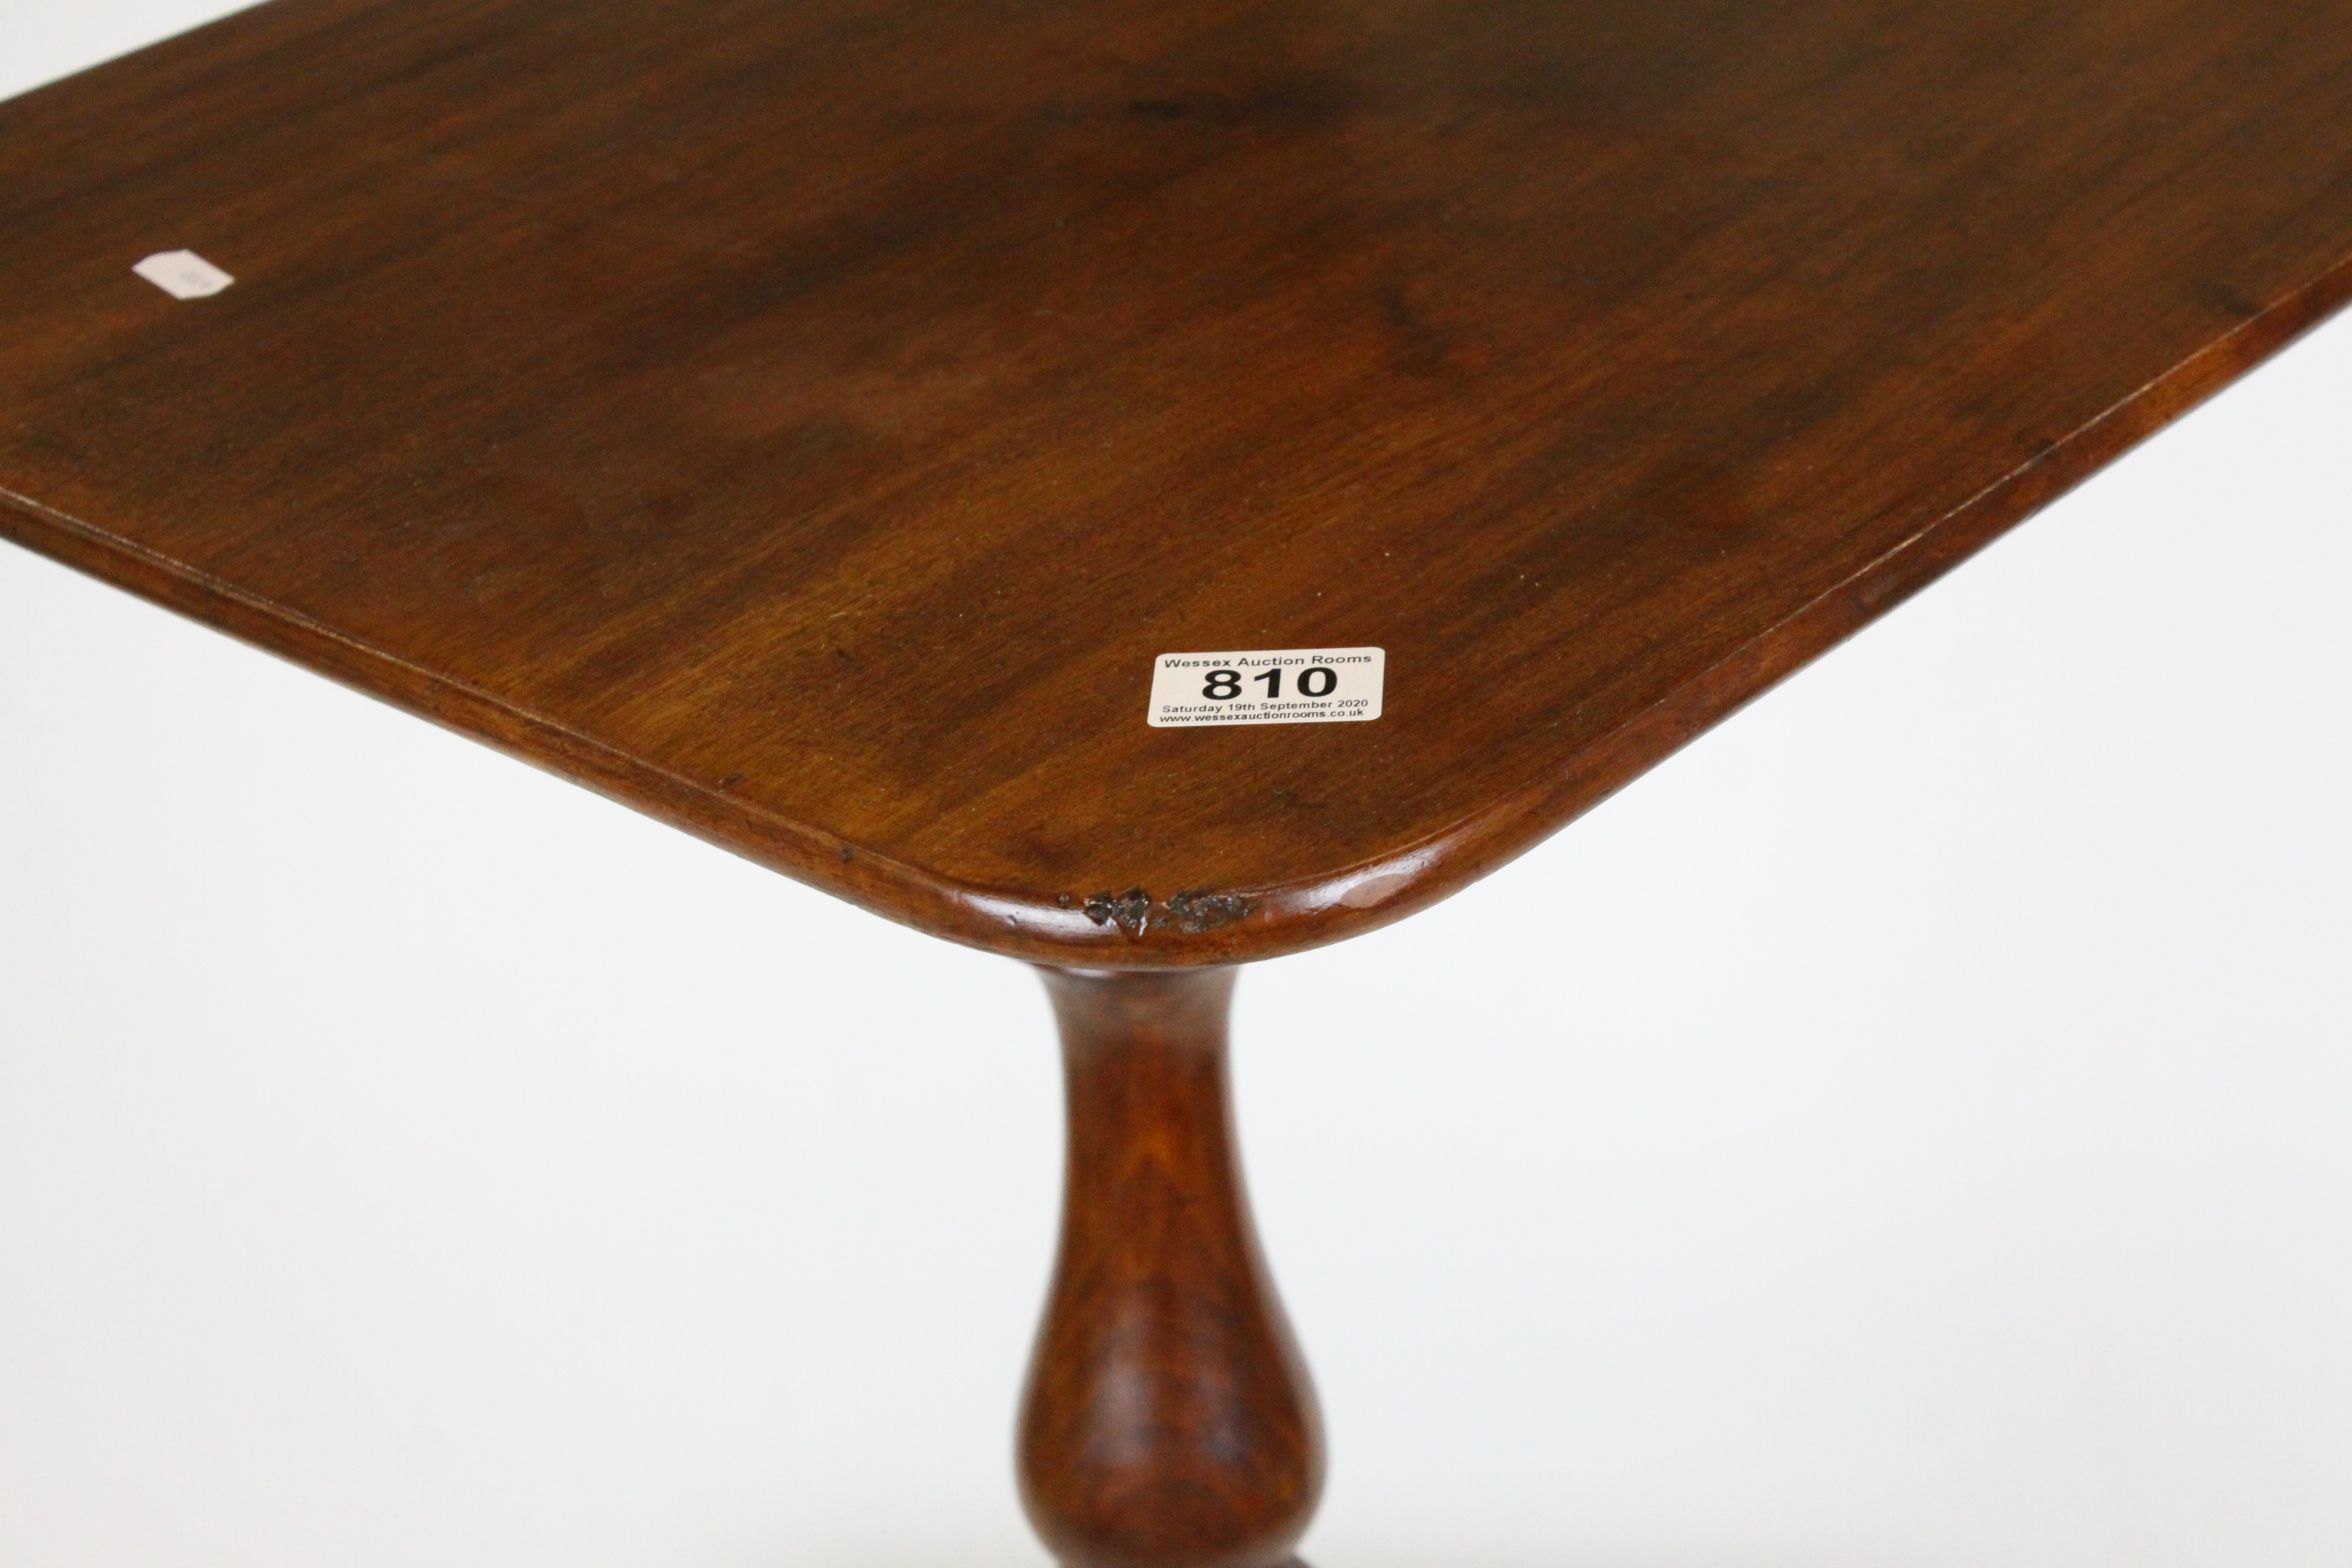 19th century Mahogany Pedestal Lamp Table with square top, 47cms wide x 70cms high - Image 2 of 9